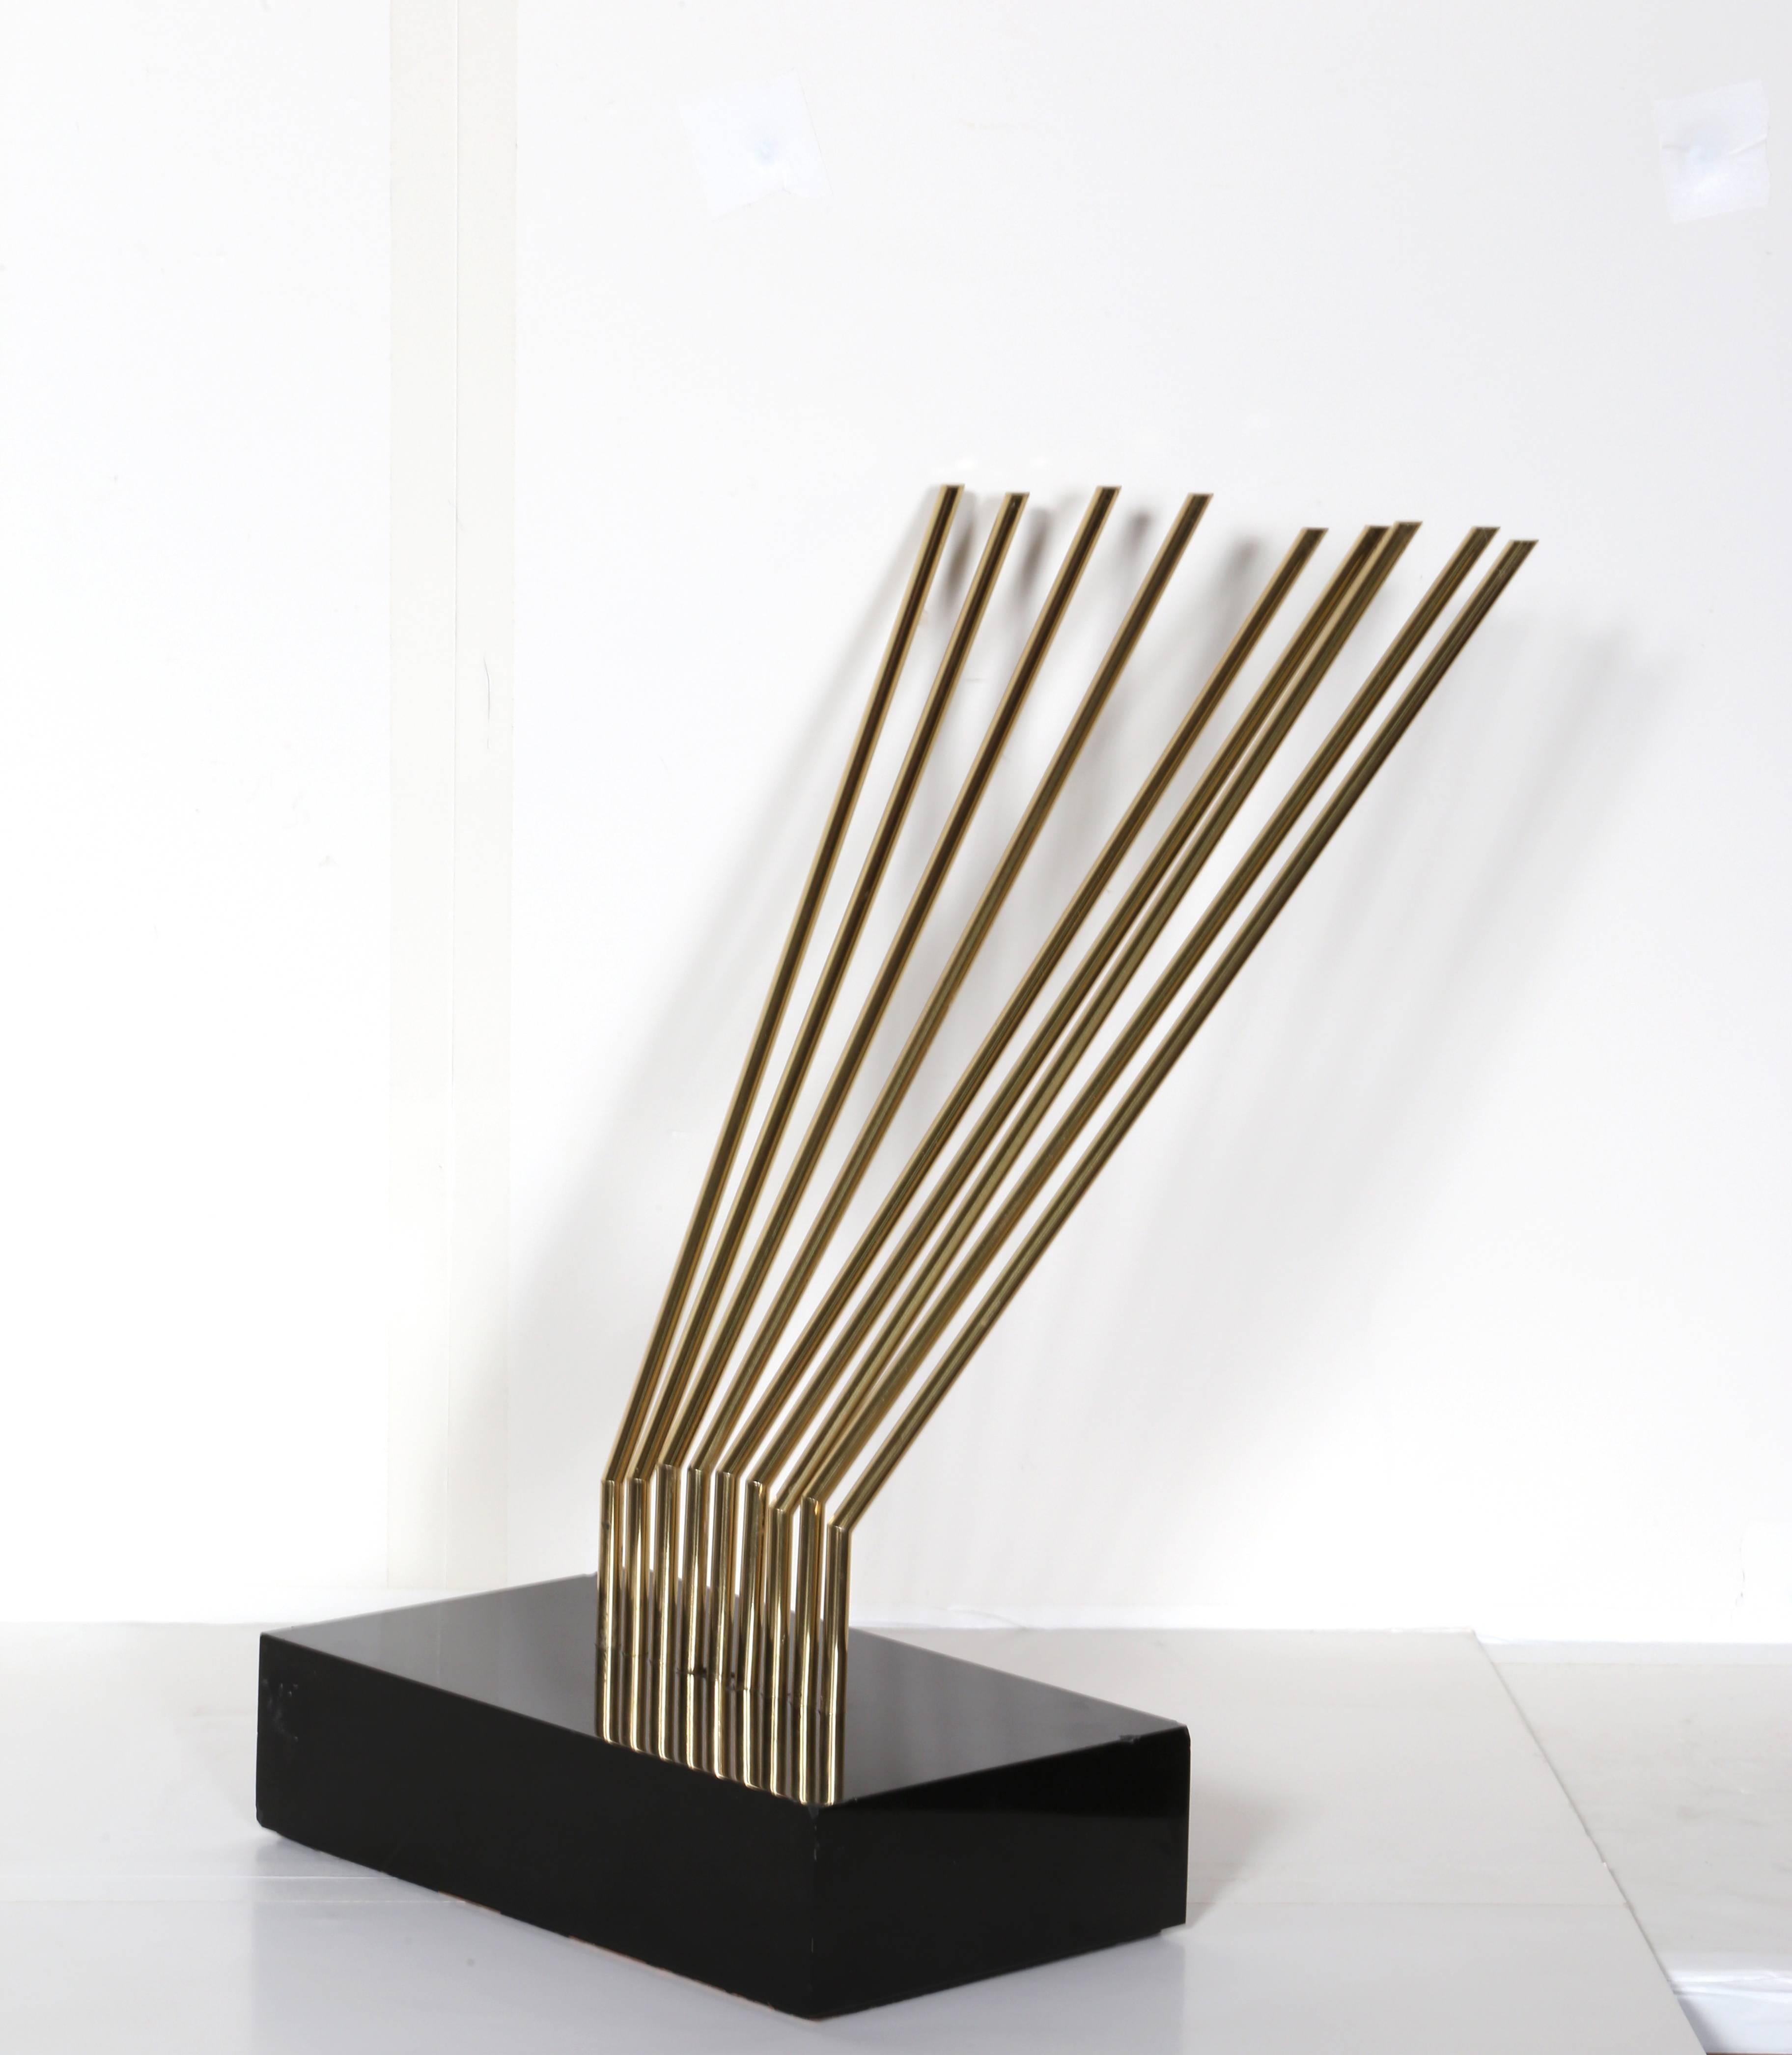 In all Directions (Toutes Directions) - Kinetic Sculpture by Yaacov Agam